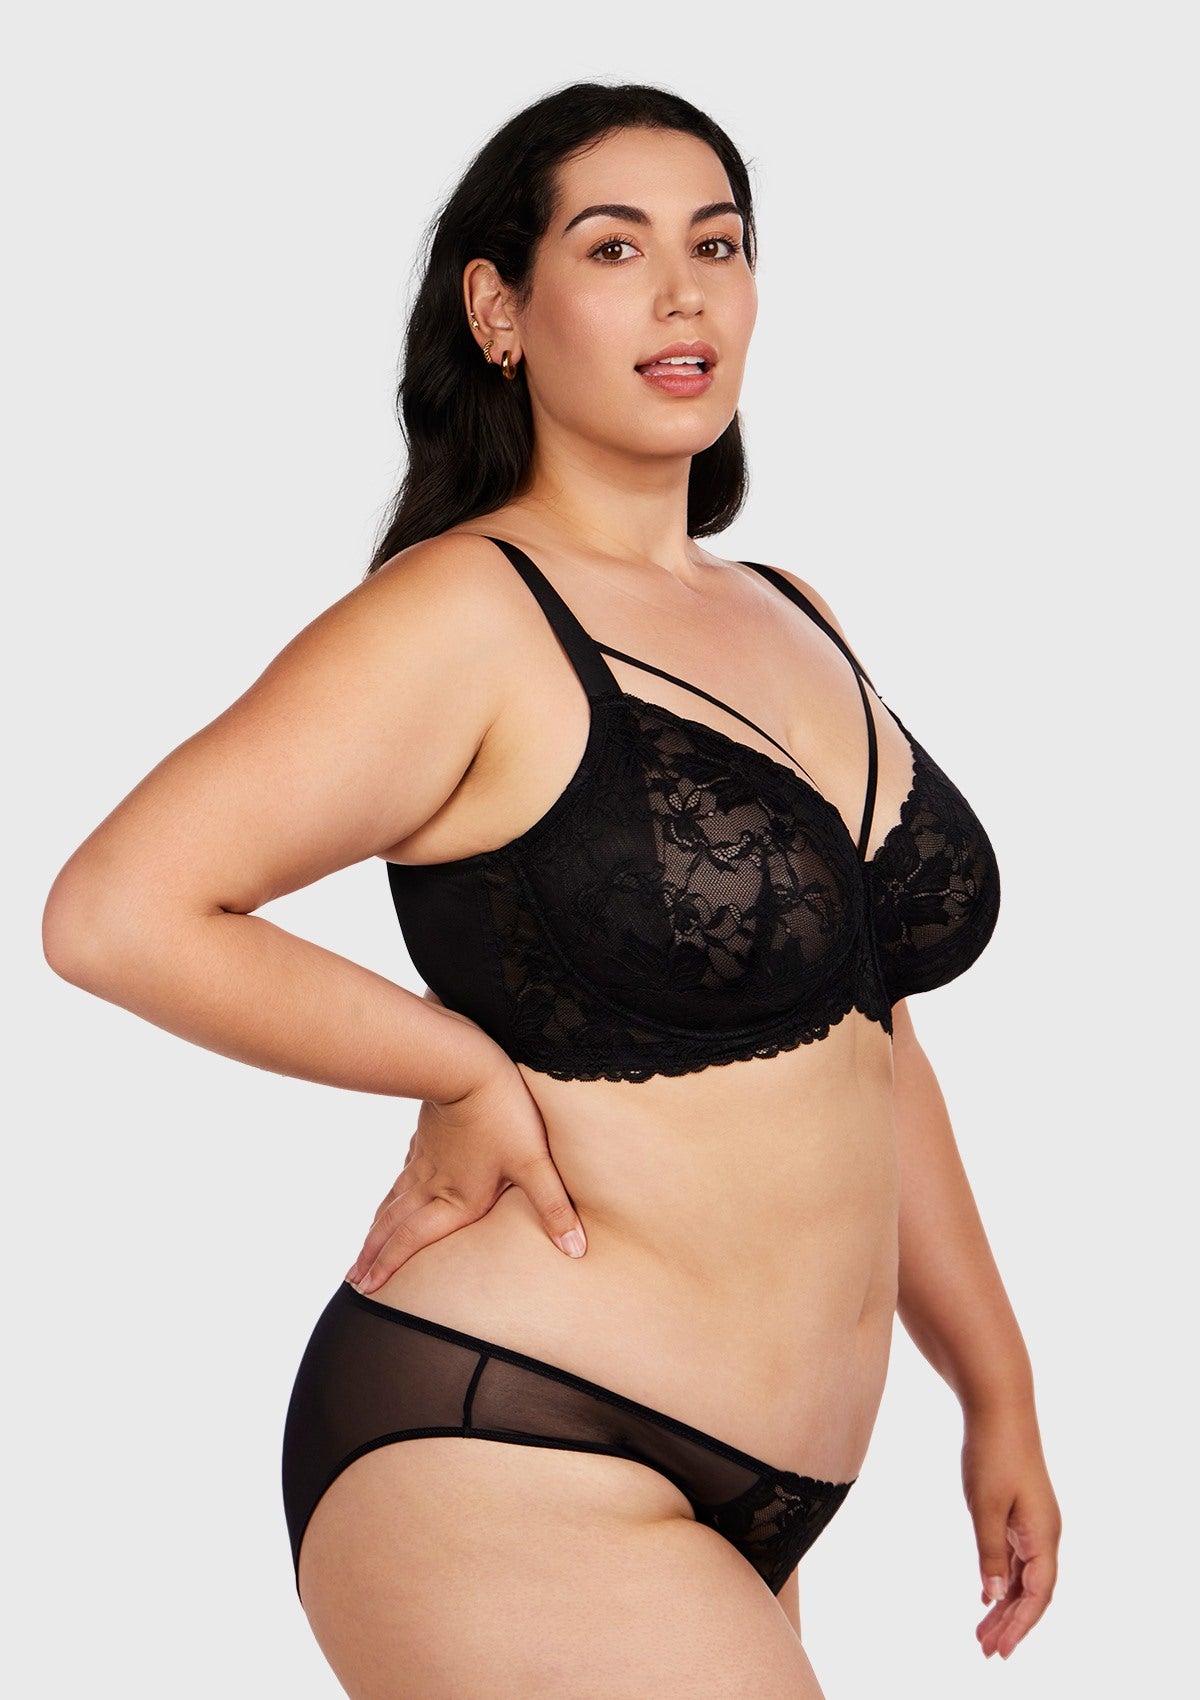 HSIA Pretty In Petals Bra - Plus Size Lingerie For Comfrot And Support - Black / 38 / G